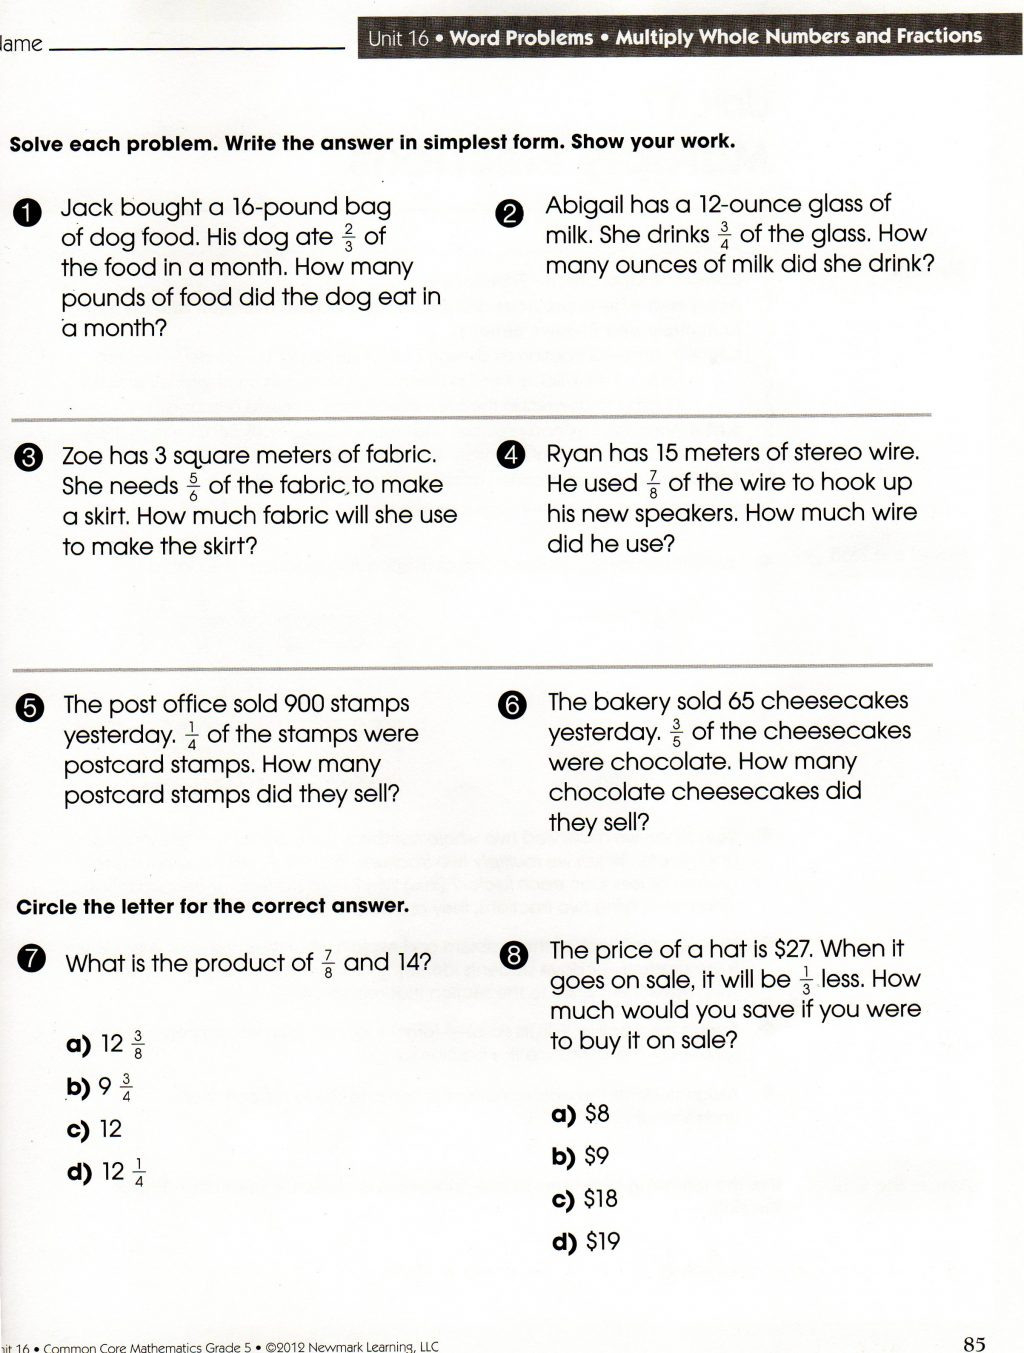 018-dividing-fraction-word-problems-math-multiplication-26-april-2012-engaged-immigrant-youth